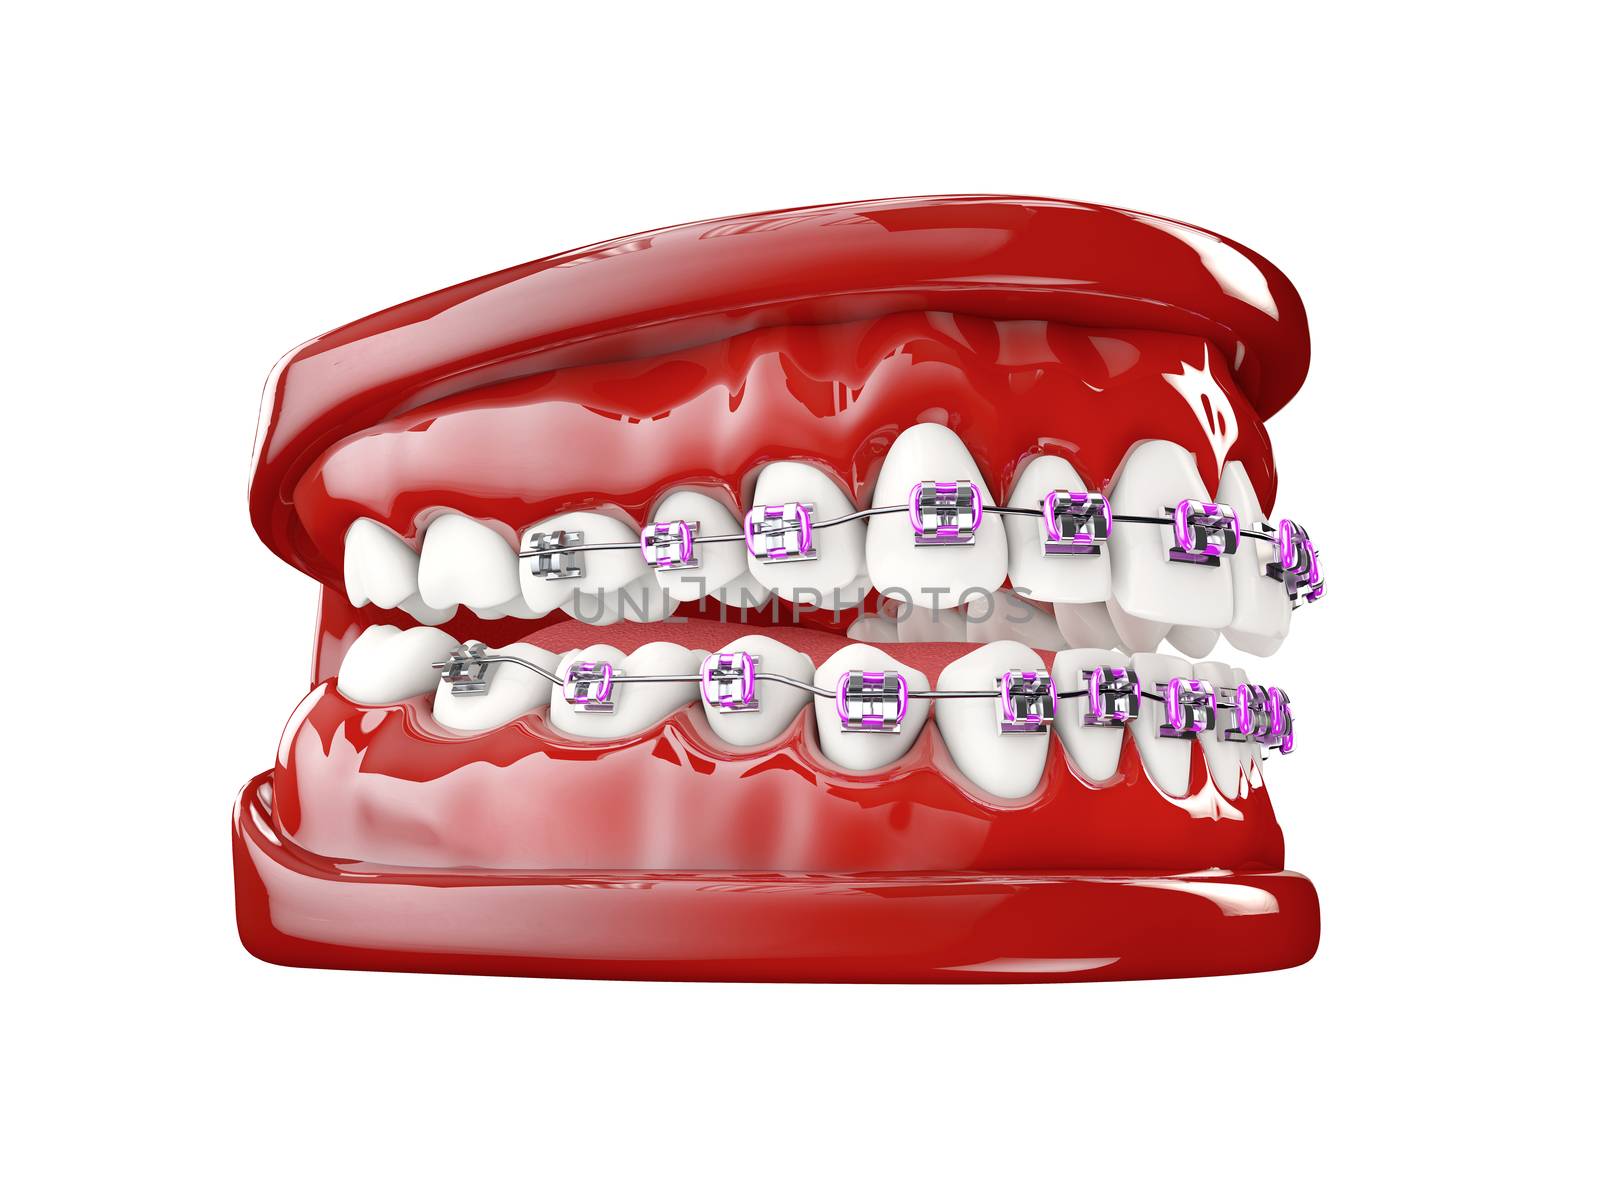 Teeth with brackets, Dental care concept 3d illustration by tussik